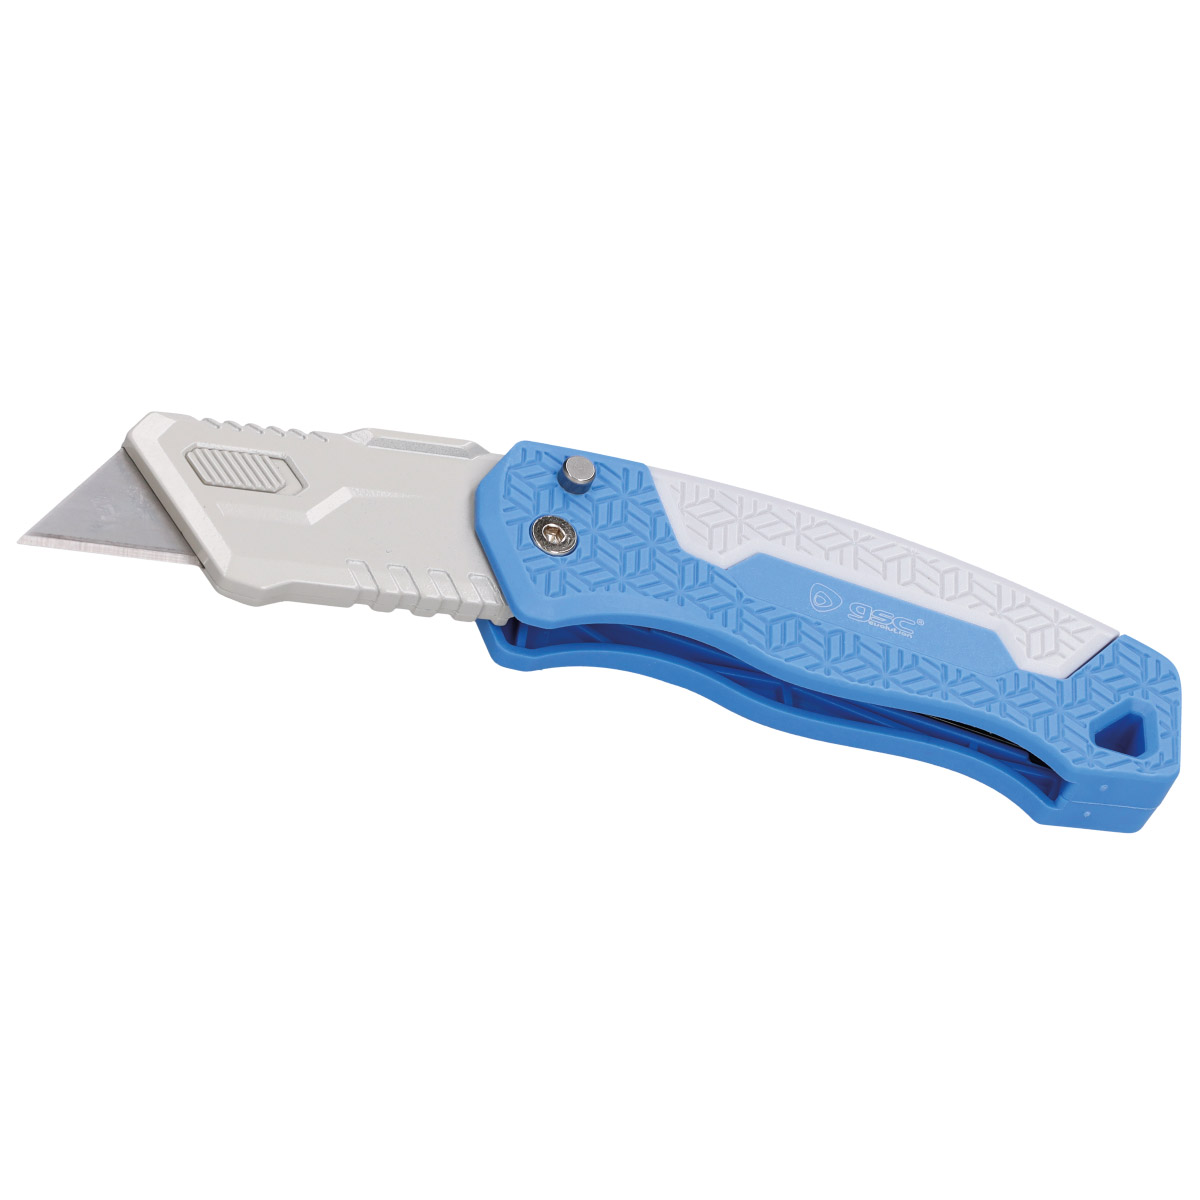 Folding knife-type safety cutter with 2 spare blades